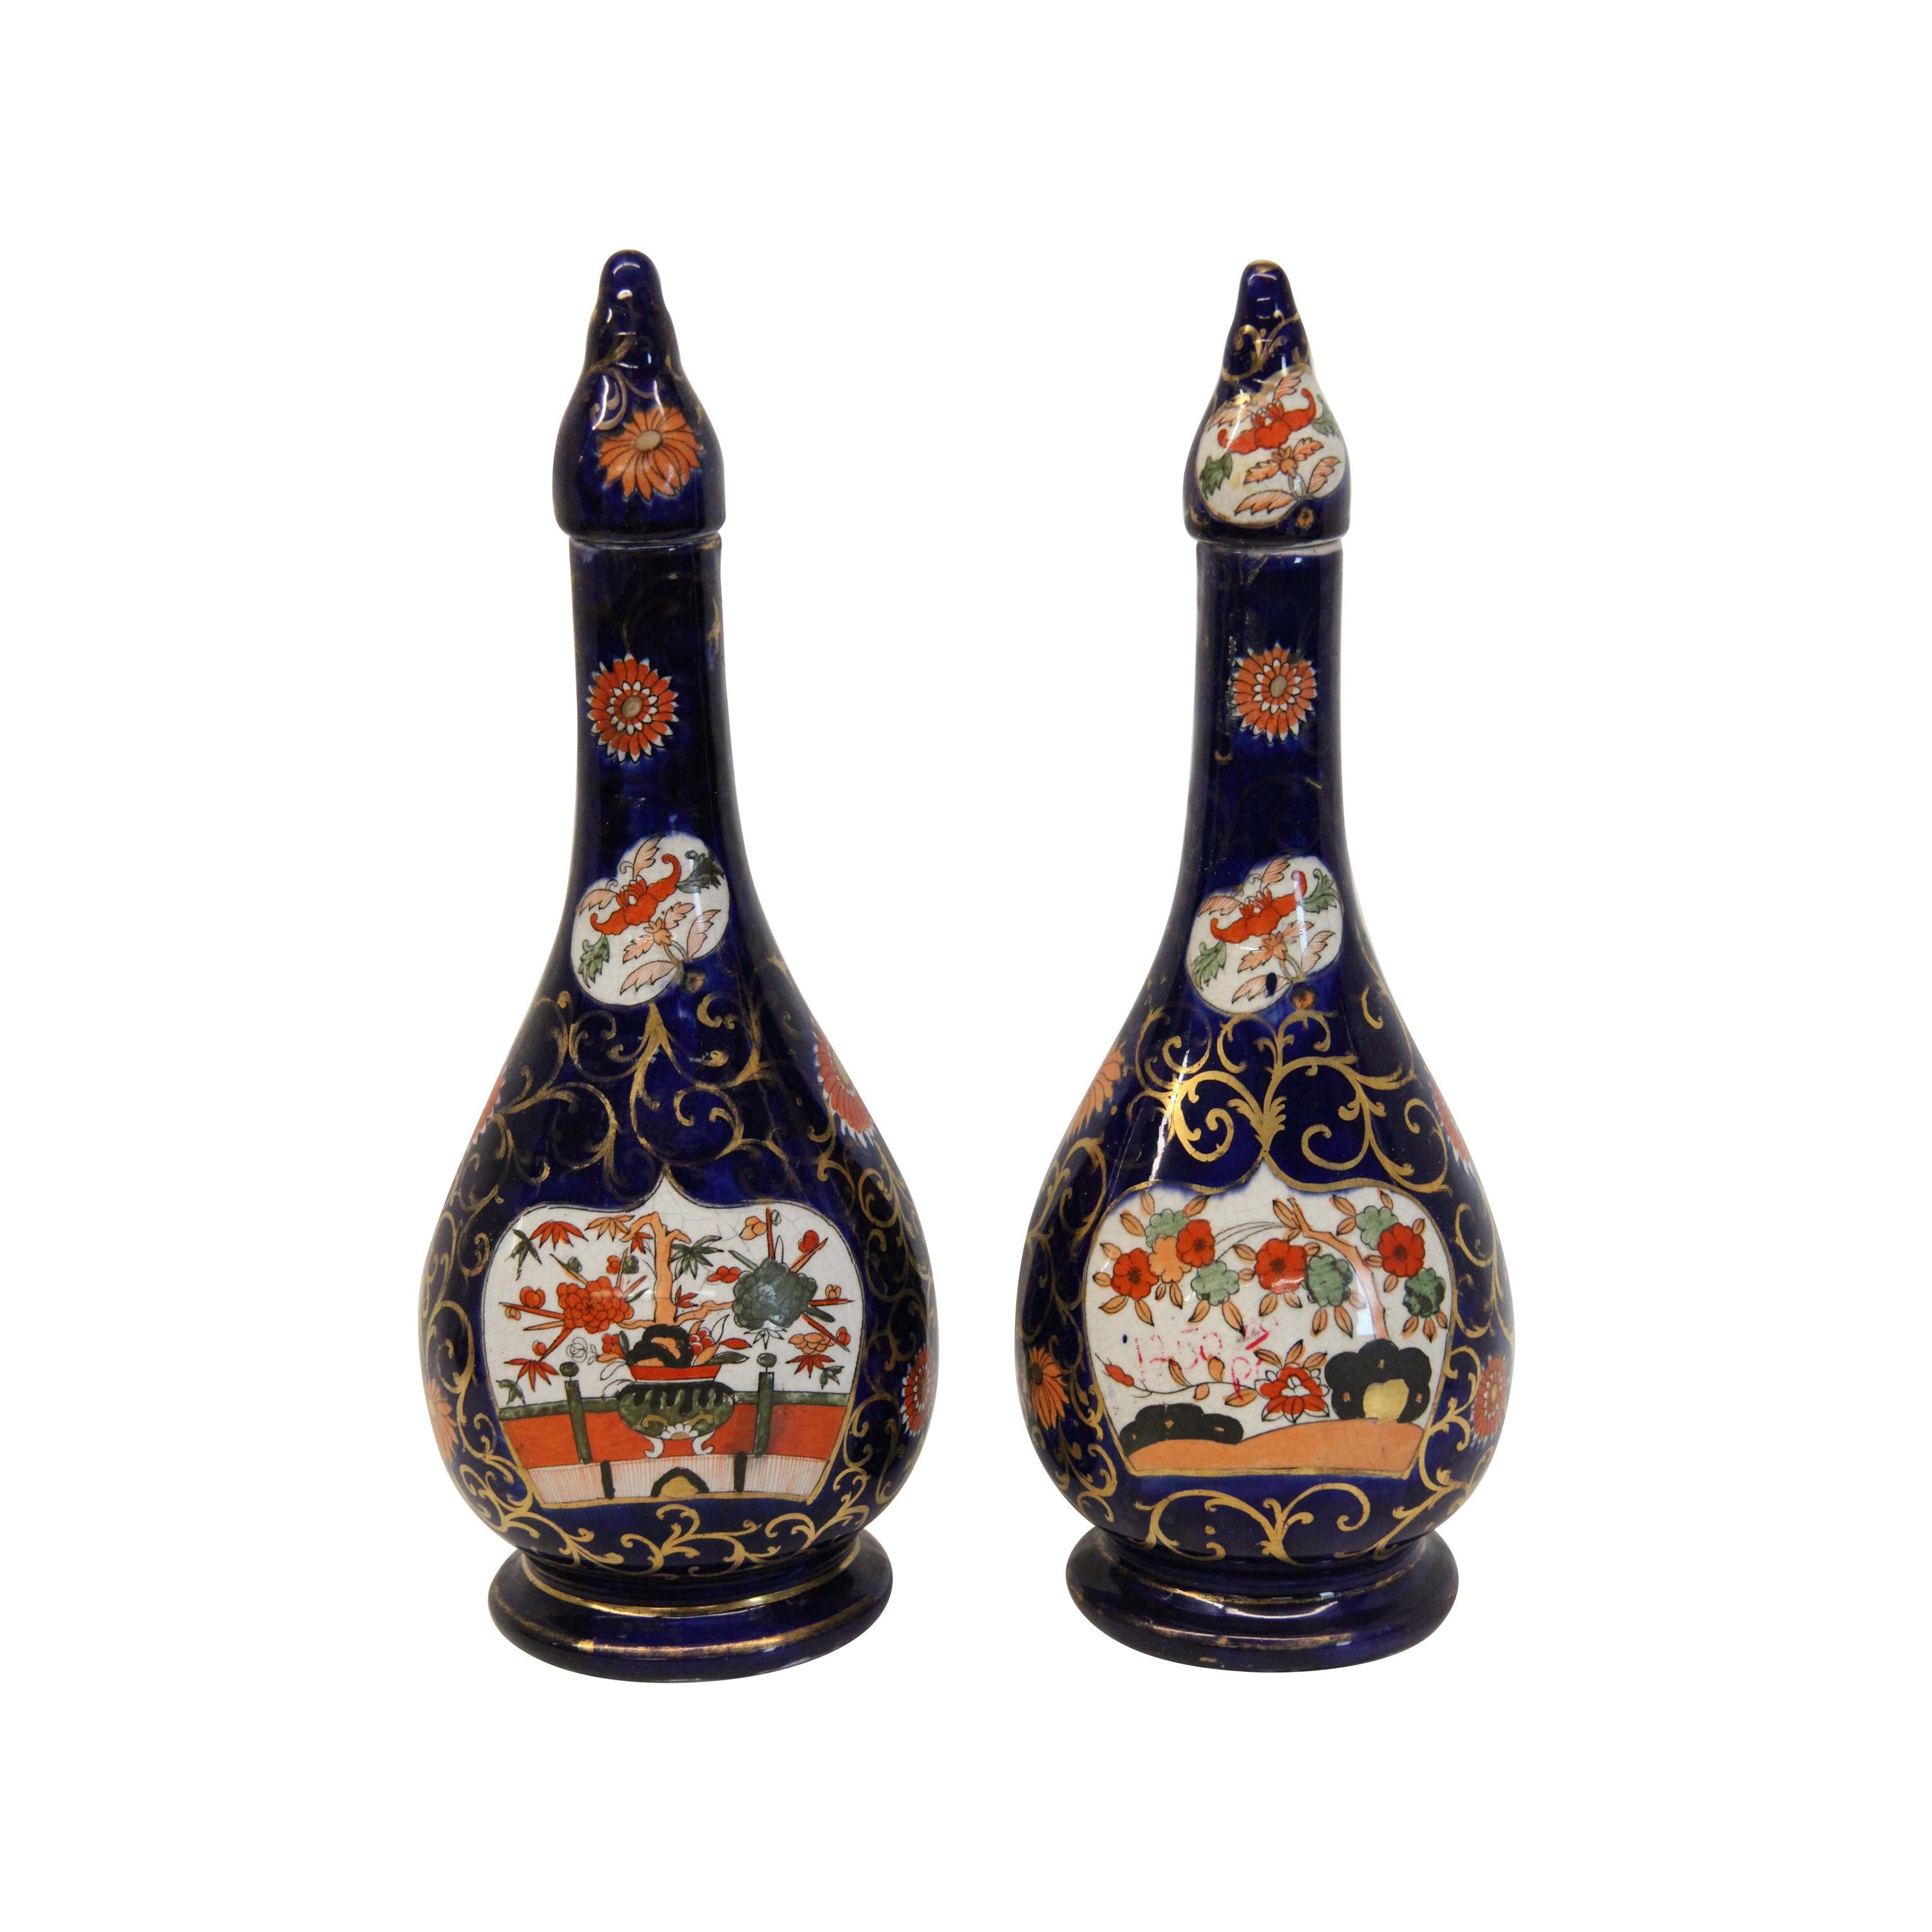 Pair of English Ironstone Vases with Lids